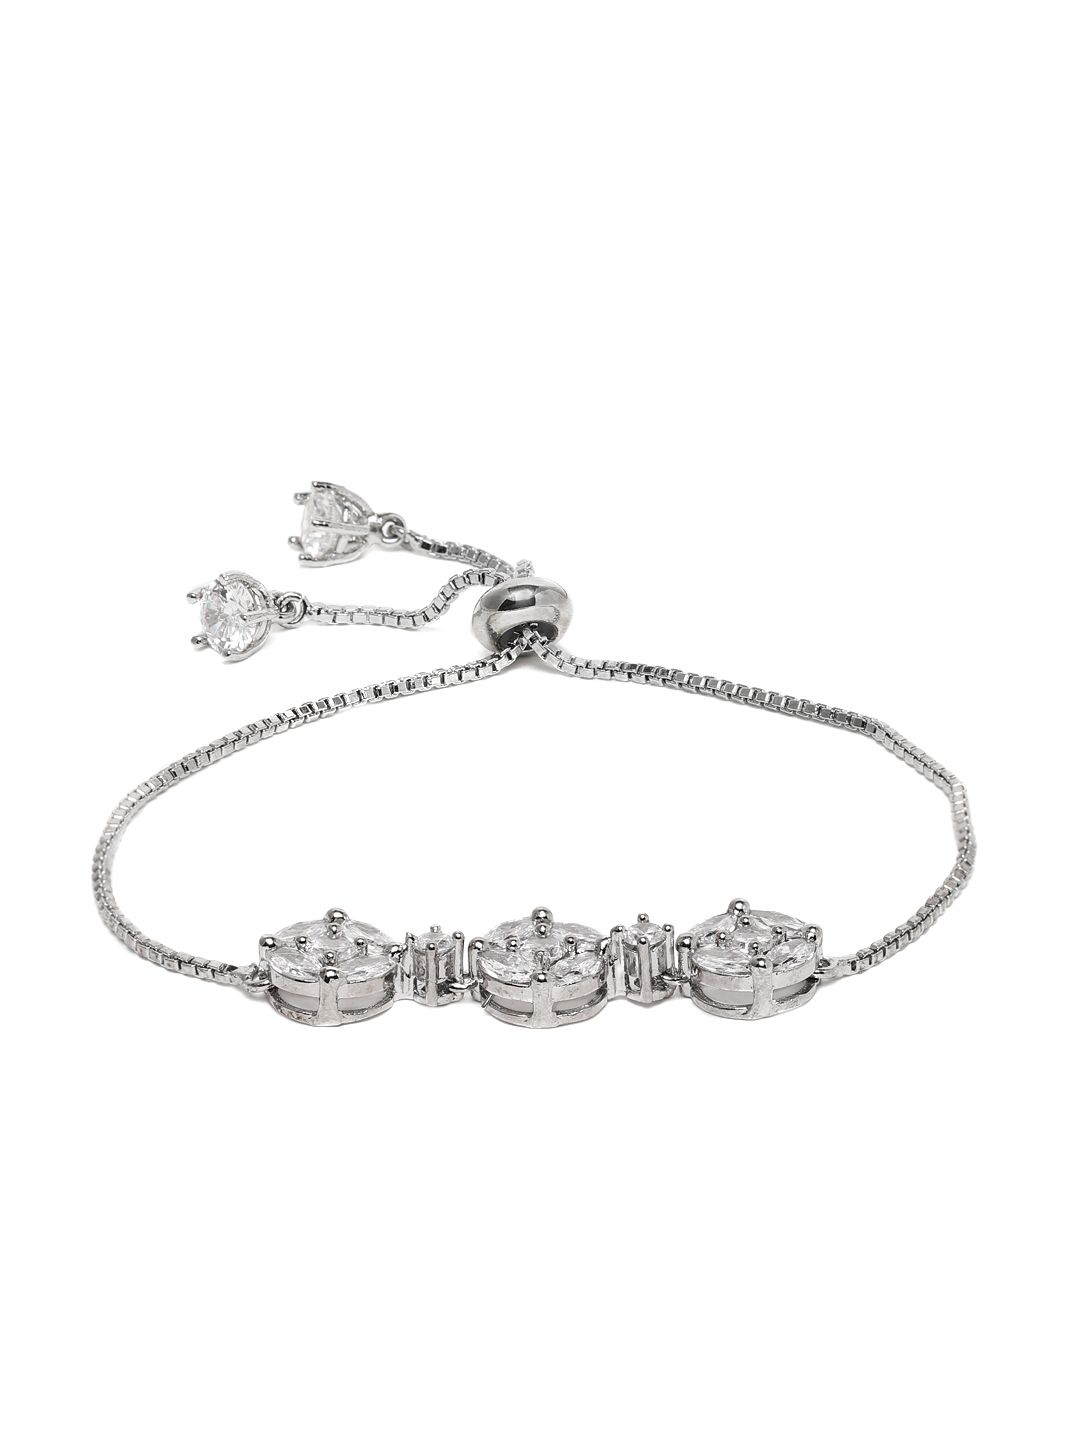 MIDASKART Silver-Toned CZ Studded Handcrafted Charm Bracelet Price in India